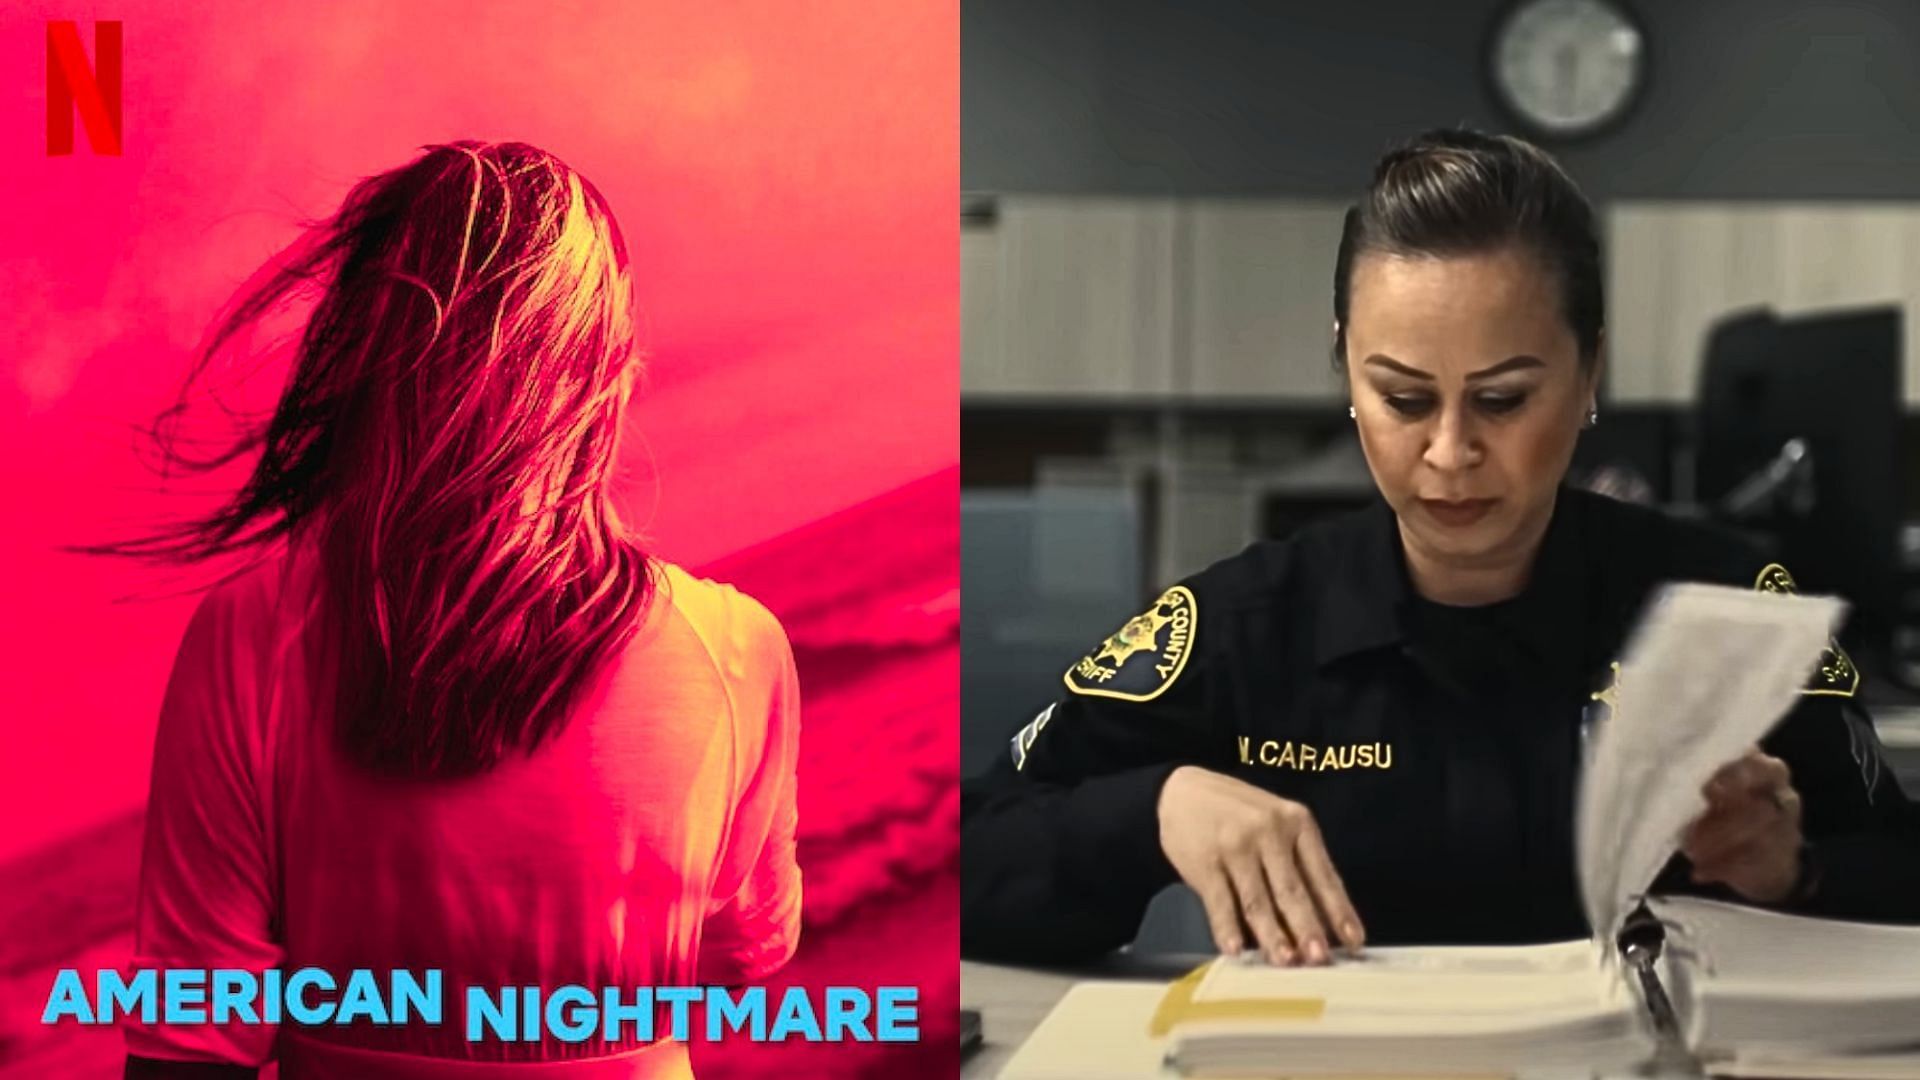 The case of the (L) American Nightmare was investigated by (R) Misty Carausu (Images via IMDb and Netflix)